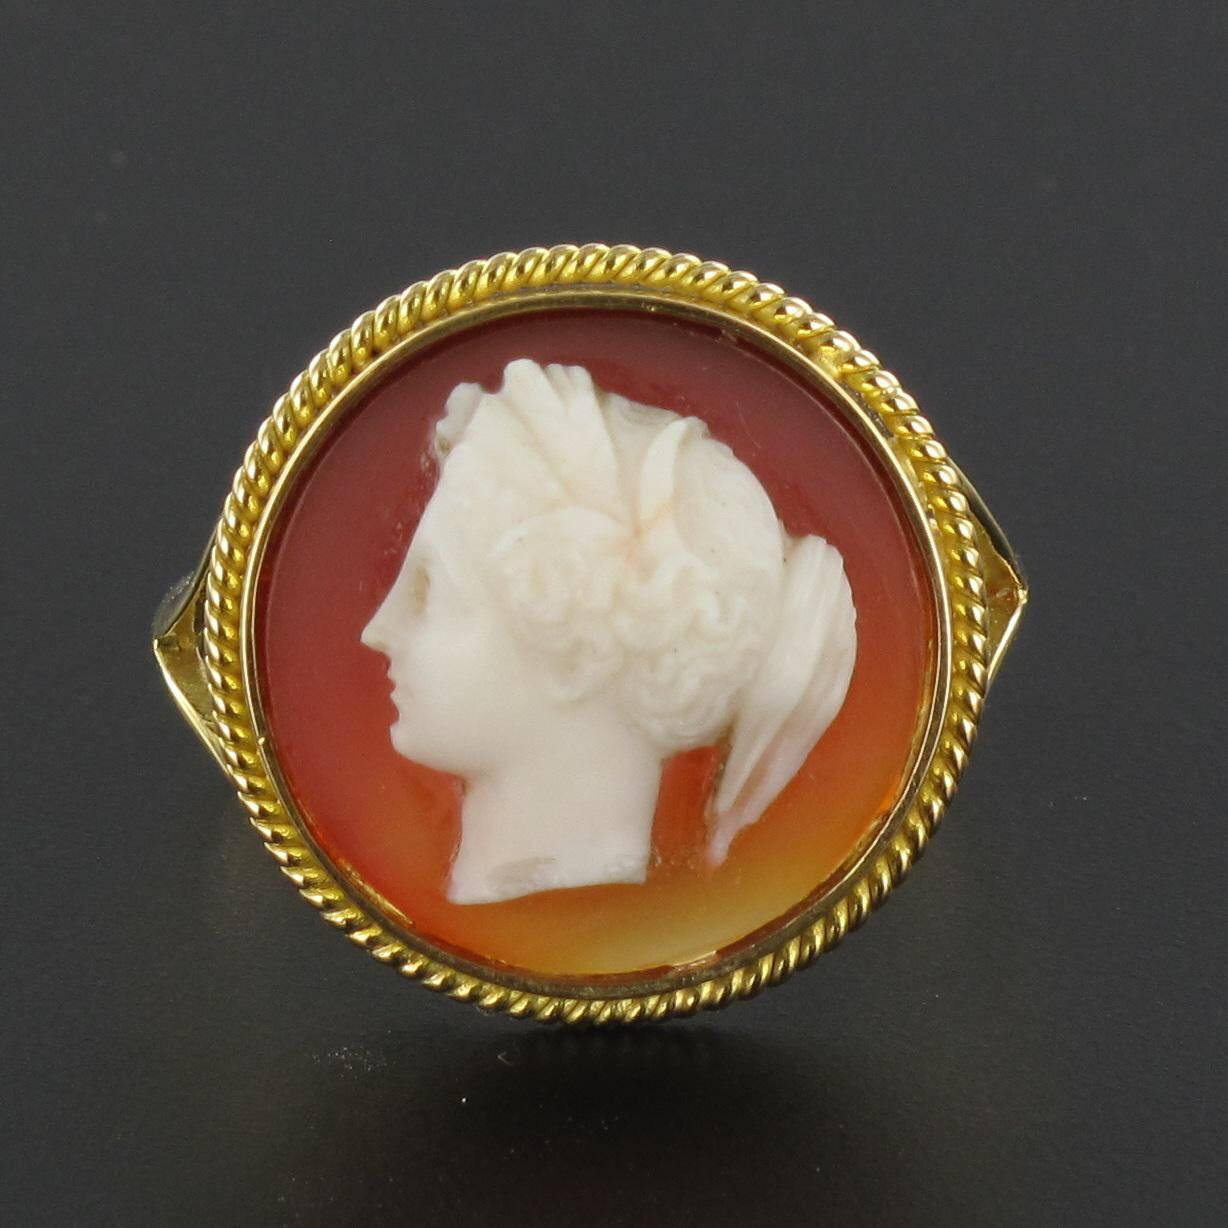 Ring in 18 carat yellow gold, eagle head hallmark. 
This superb cameo ring is bezel set with a superb cameo on agate bordered by a fine twisted golden thread. The beginning of the band ring is double which then combines to form a single comfortable